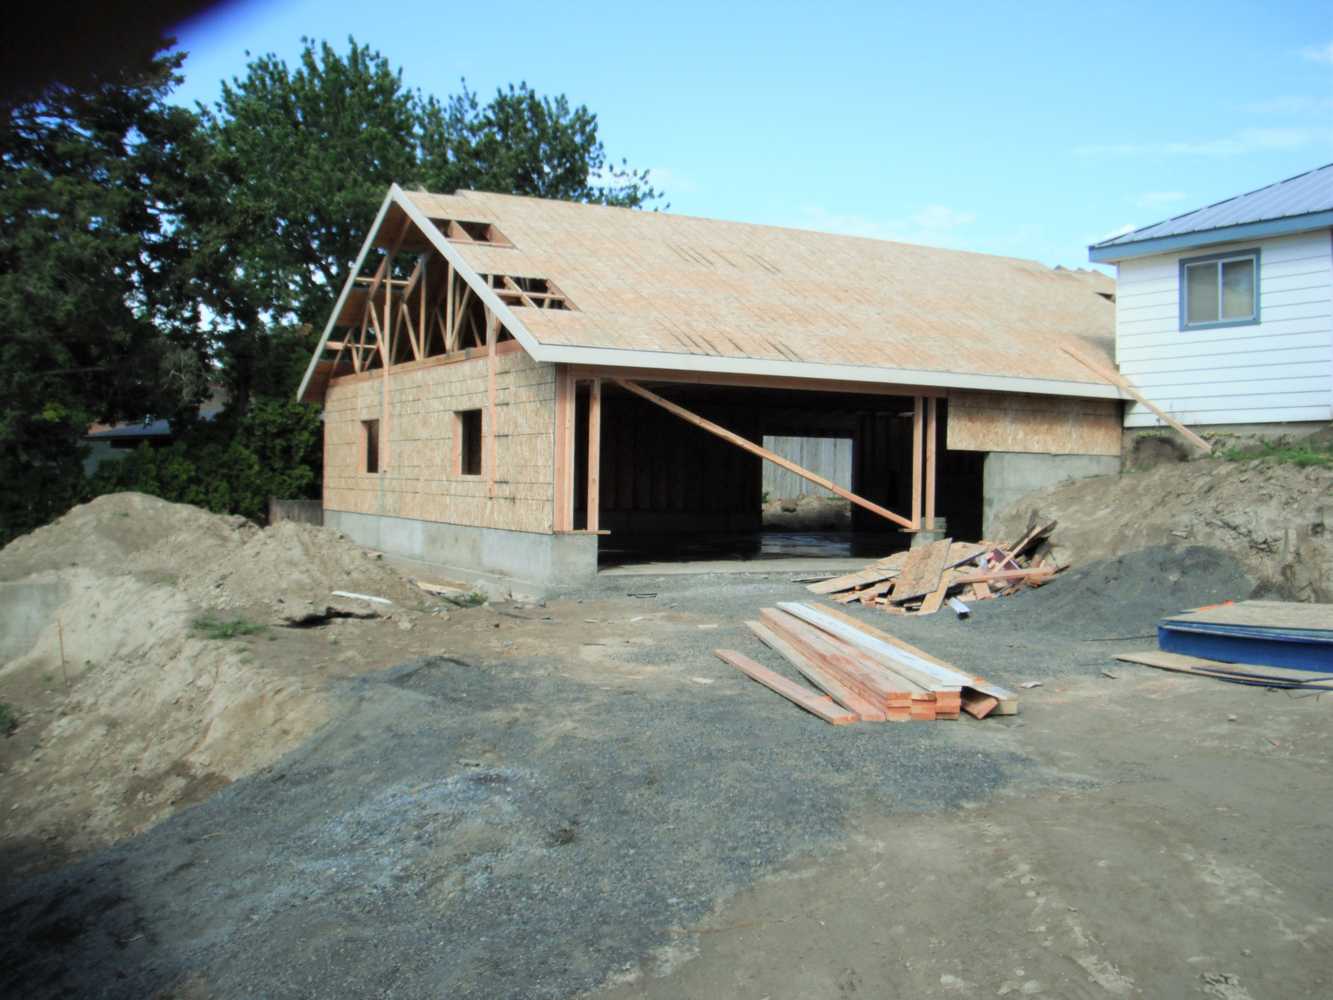 Photos from Vision Construction